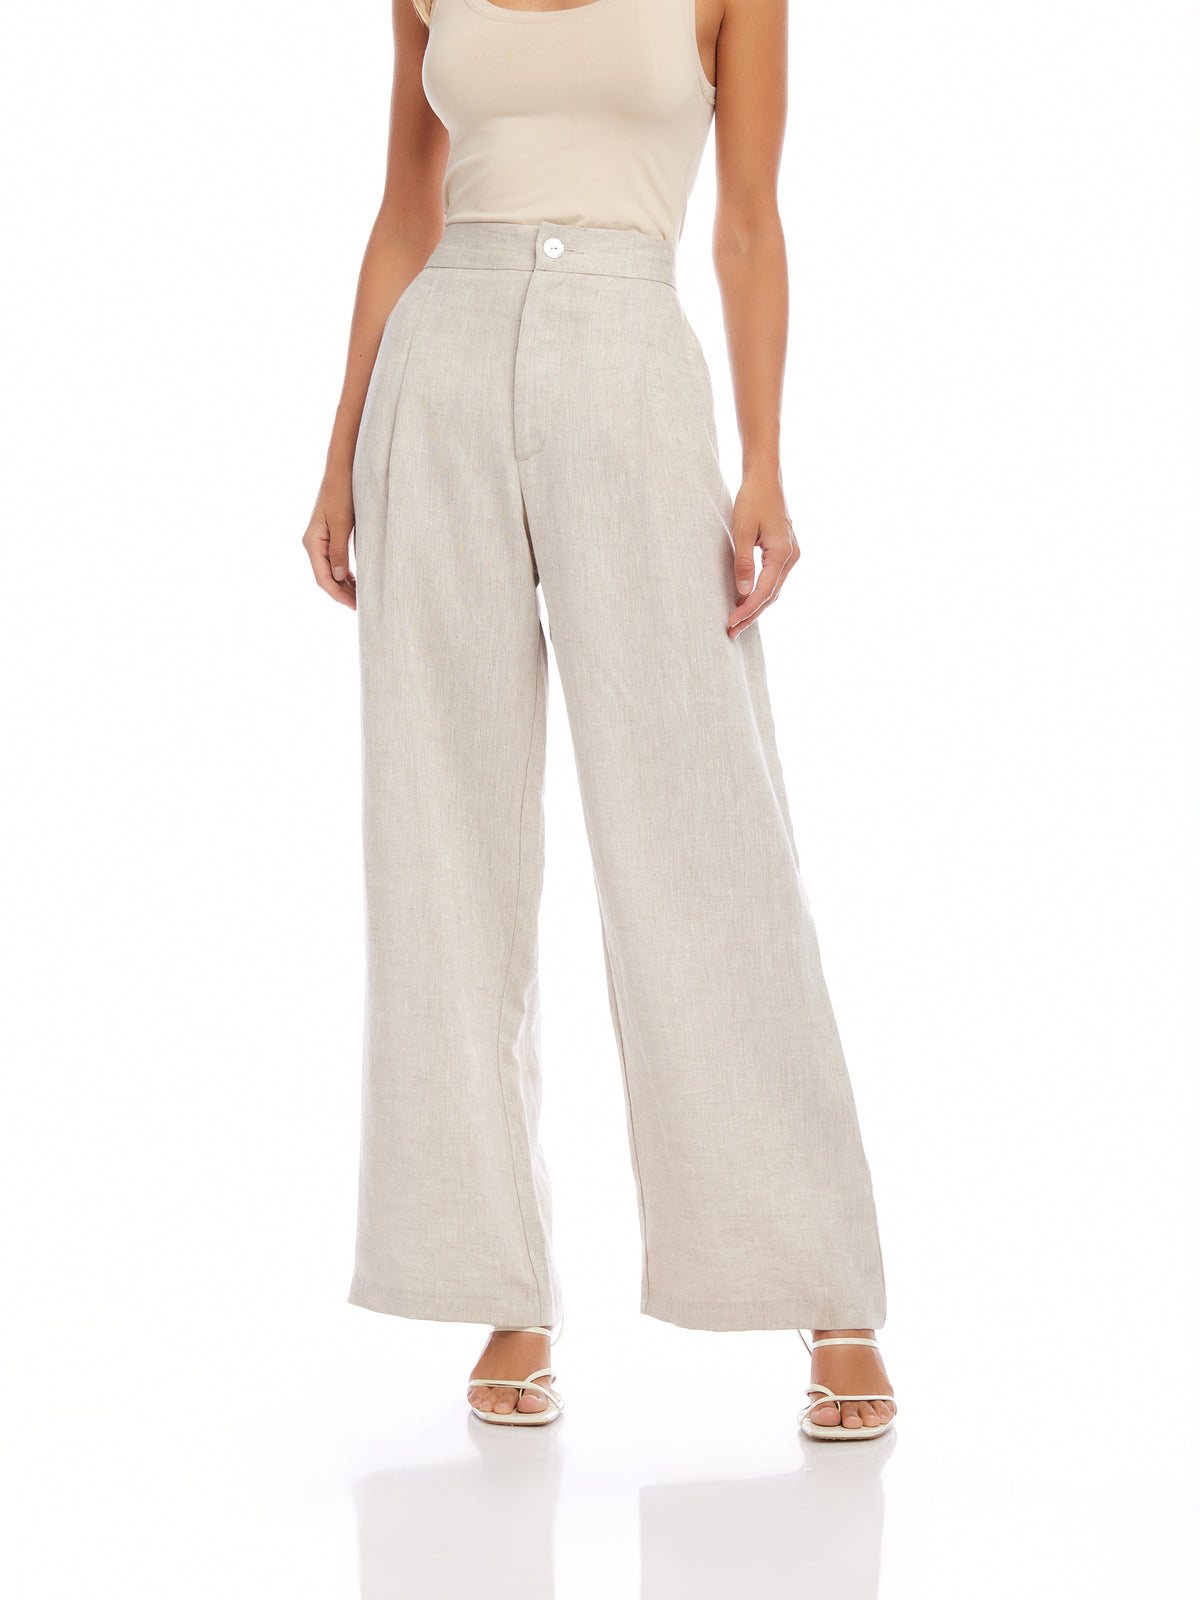 High Waisted Linen Pant in Oatmeal